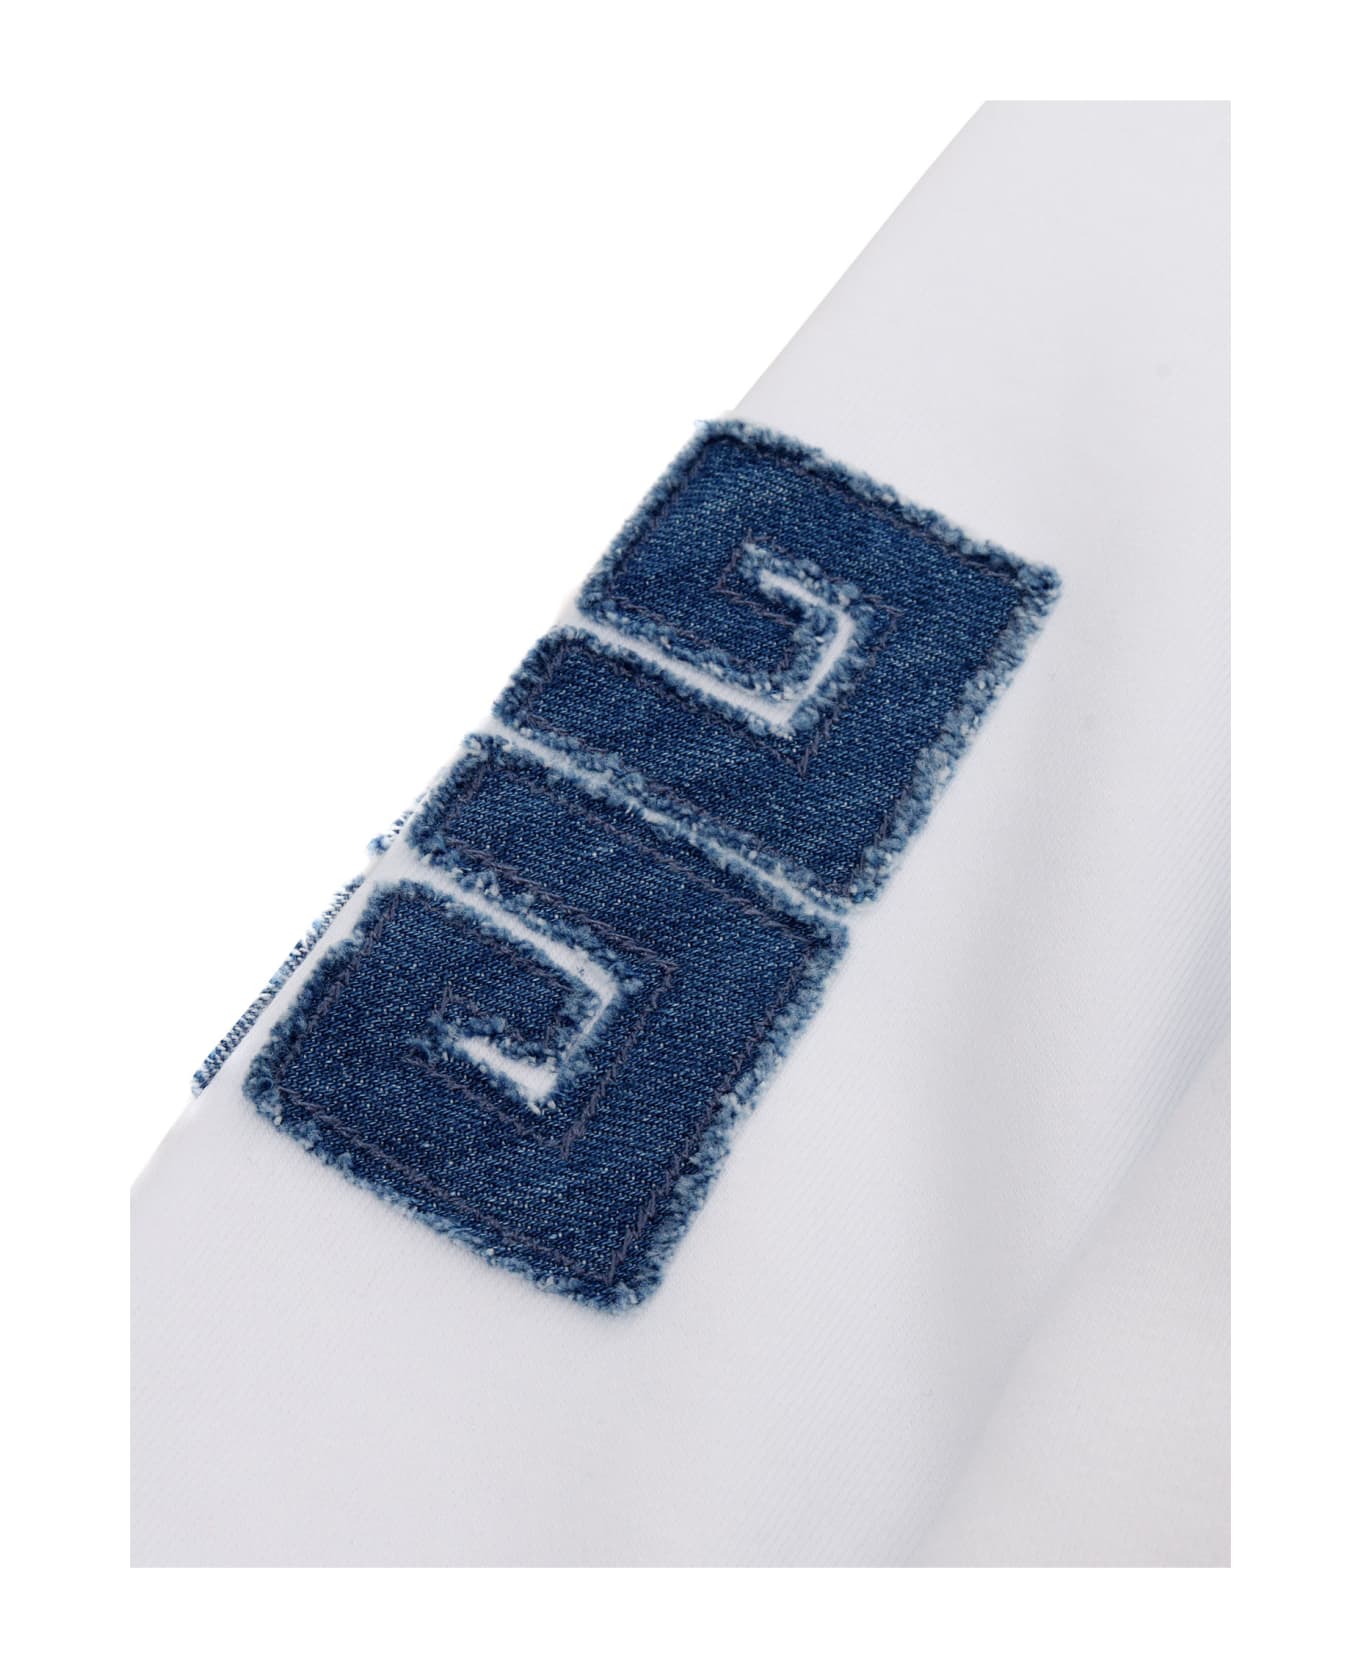 Givenchy White Sweater With Embroidered Logo - WHITE